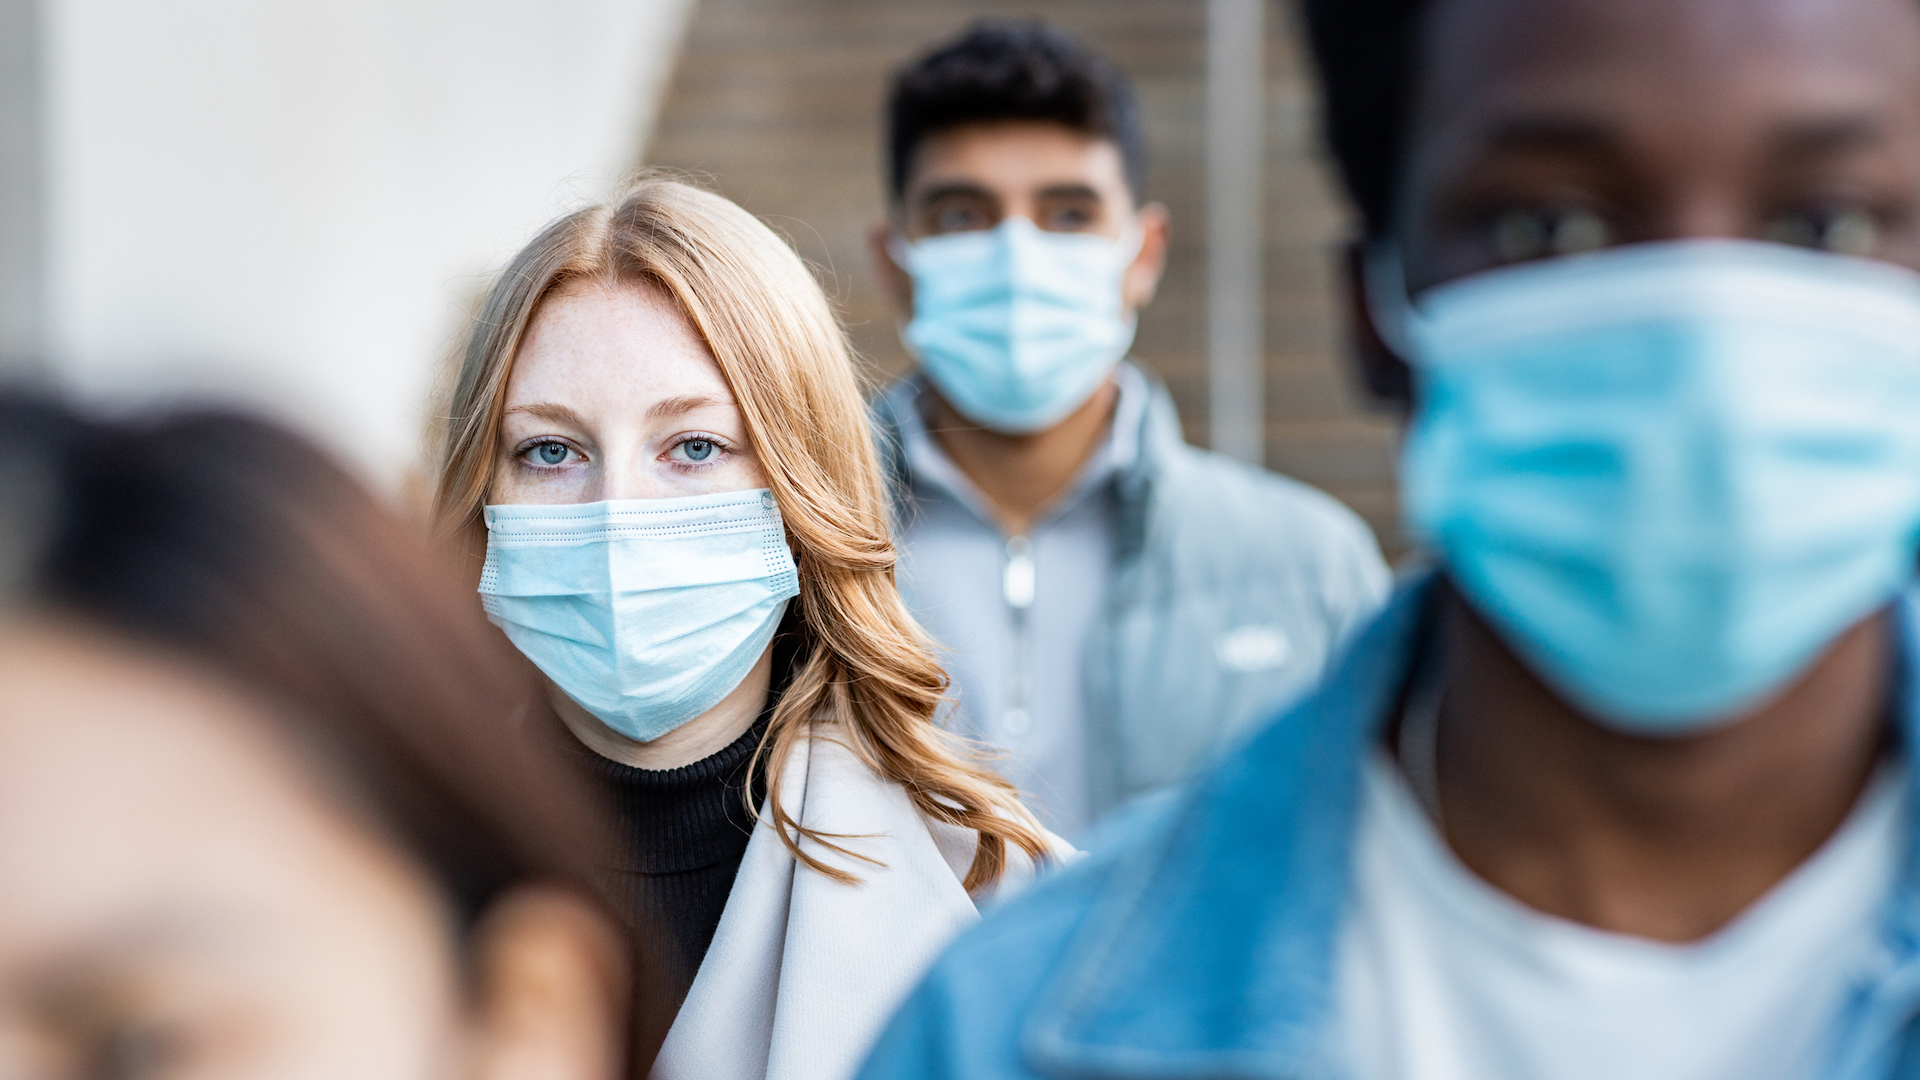 A photograph of a group of people wearing blue surgical masks.